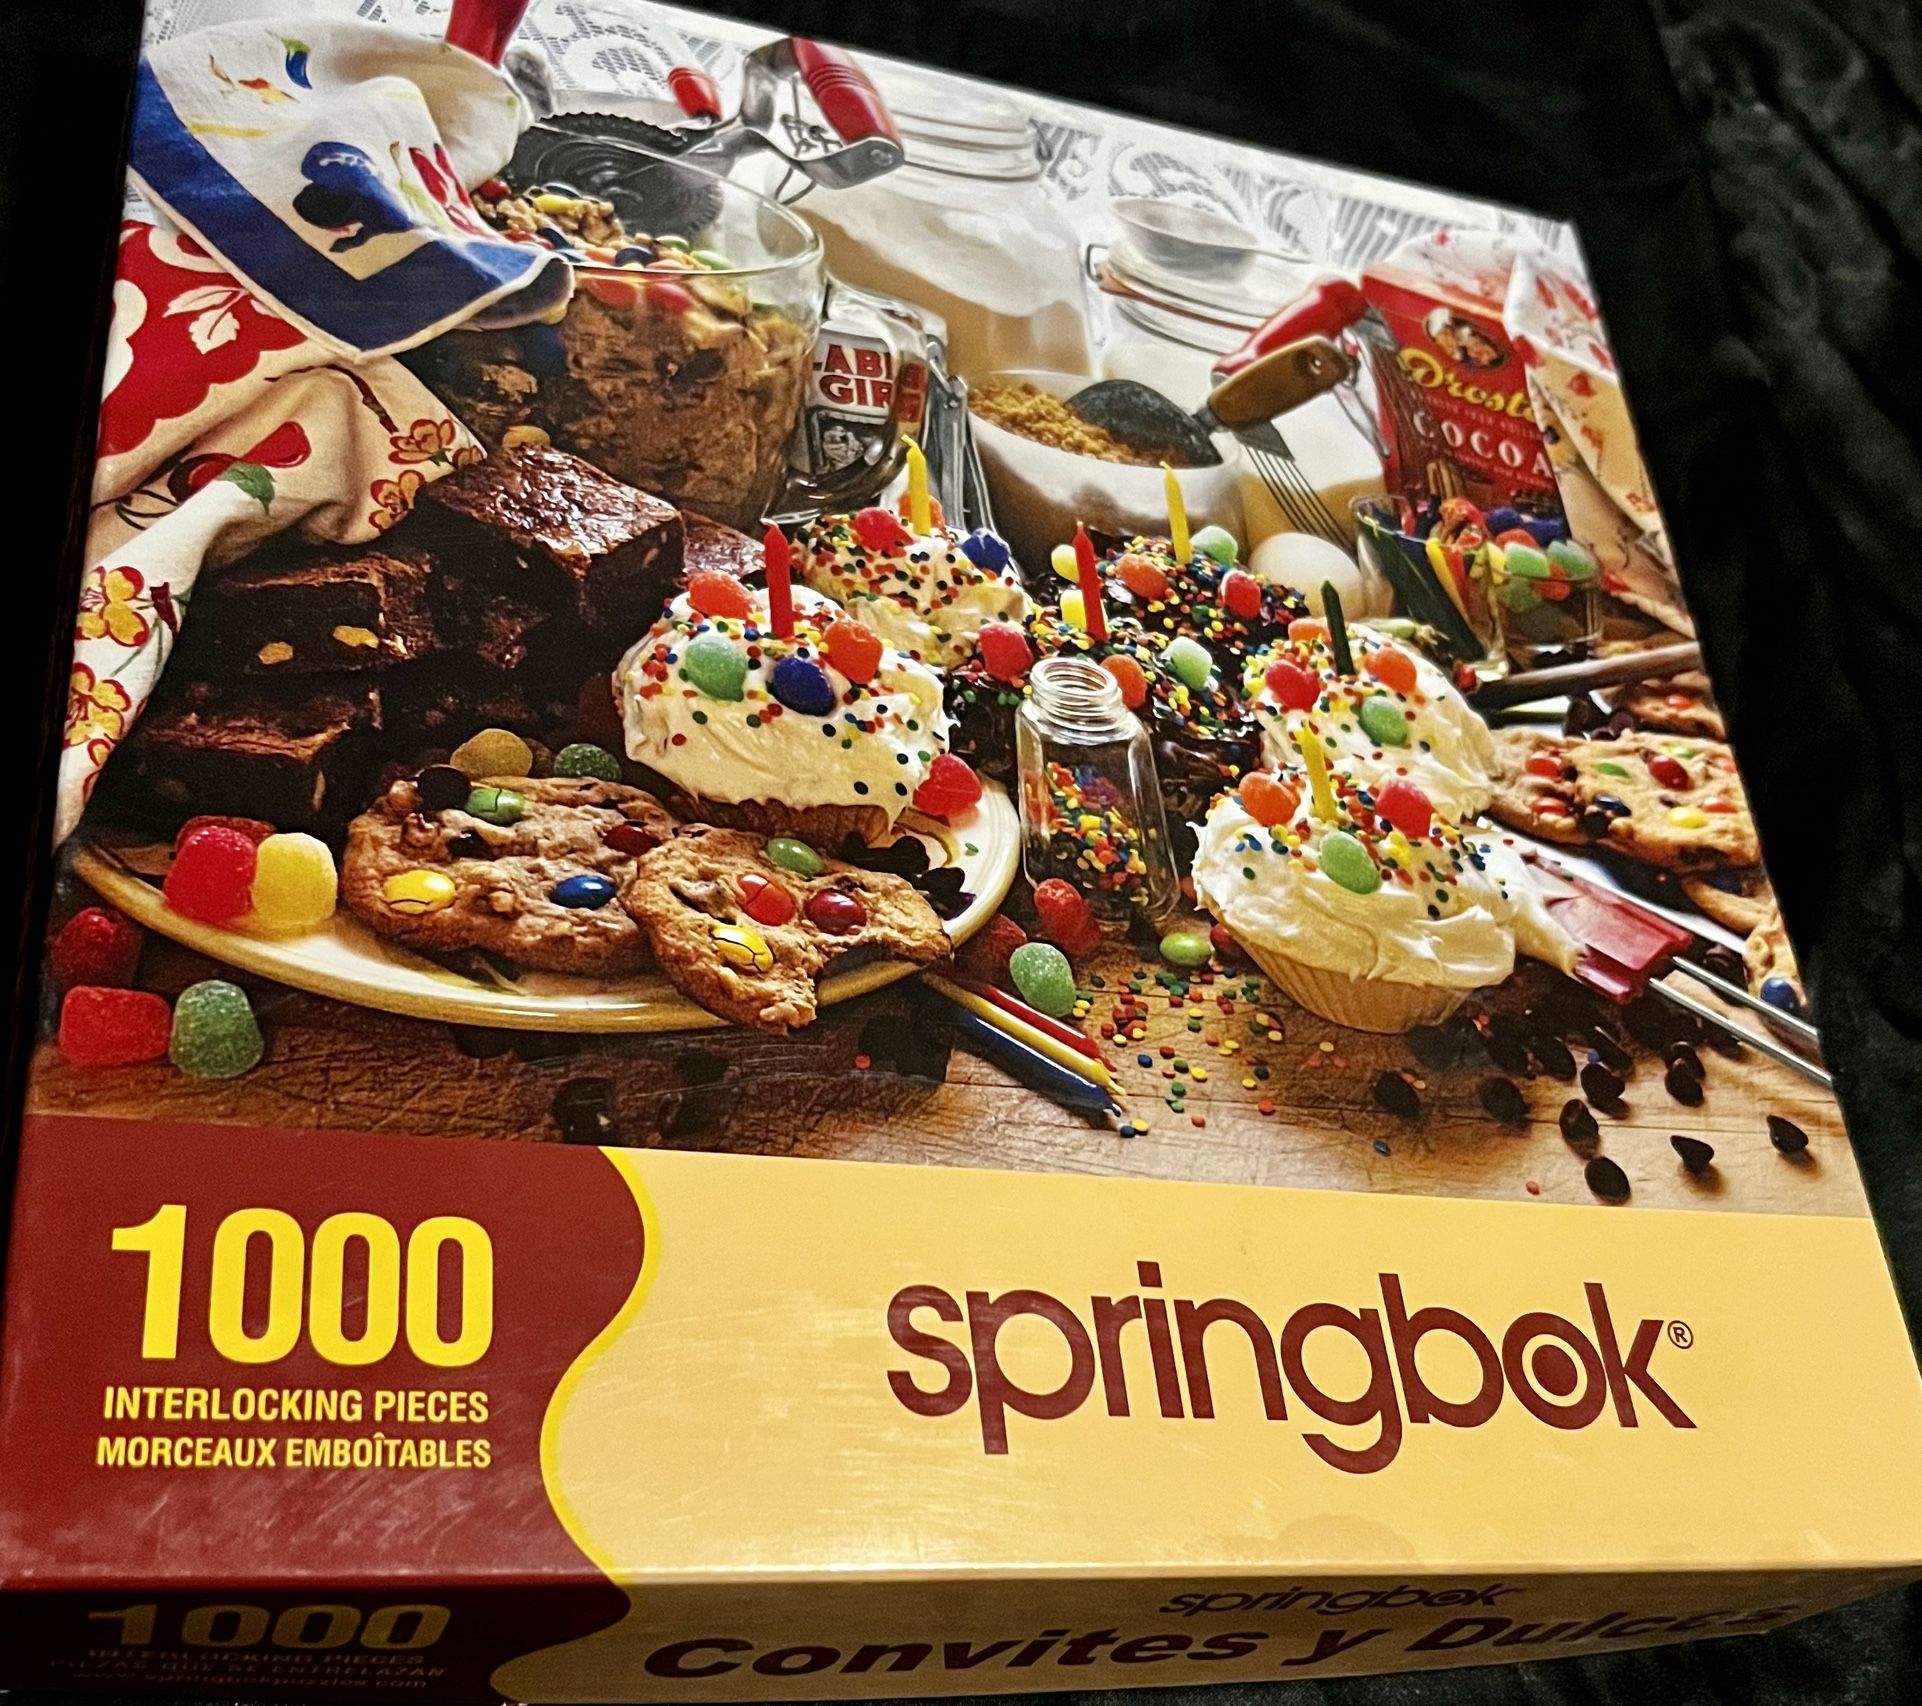 Complete Springbok Treats & Sweets 1000 Piece Jigsaw Puzzle